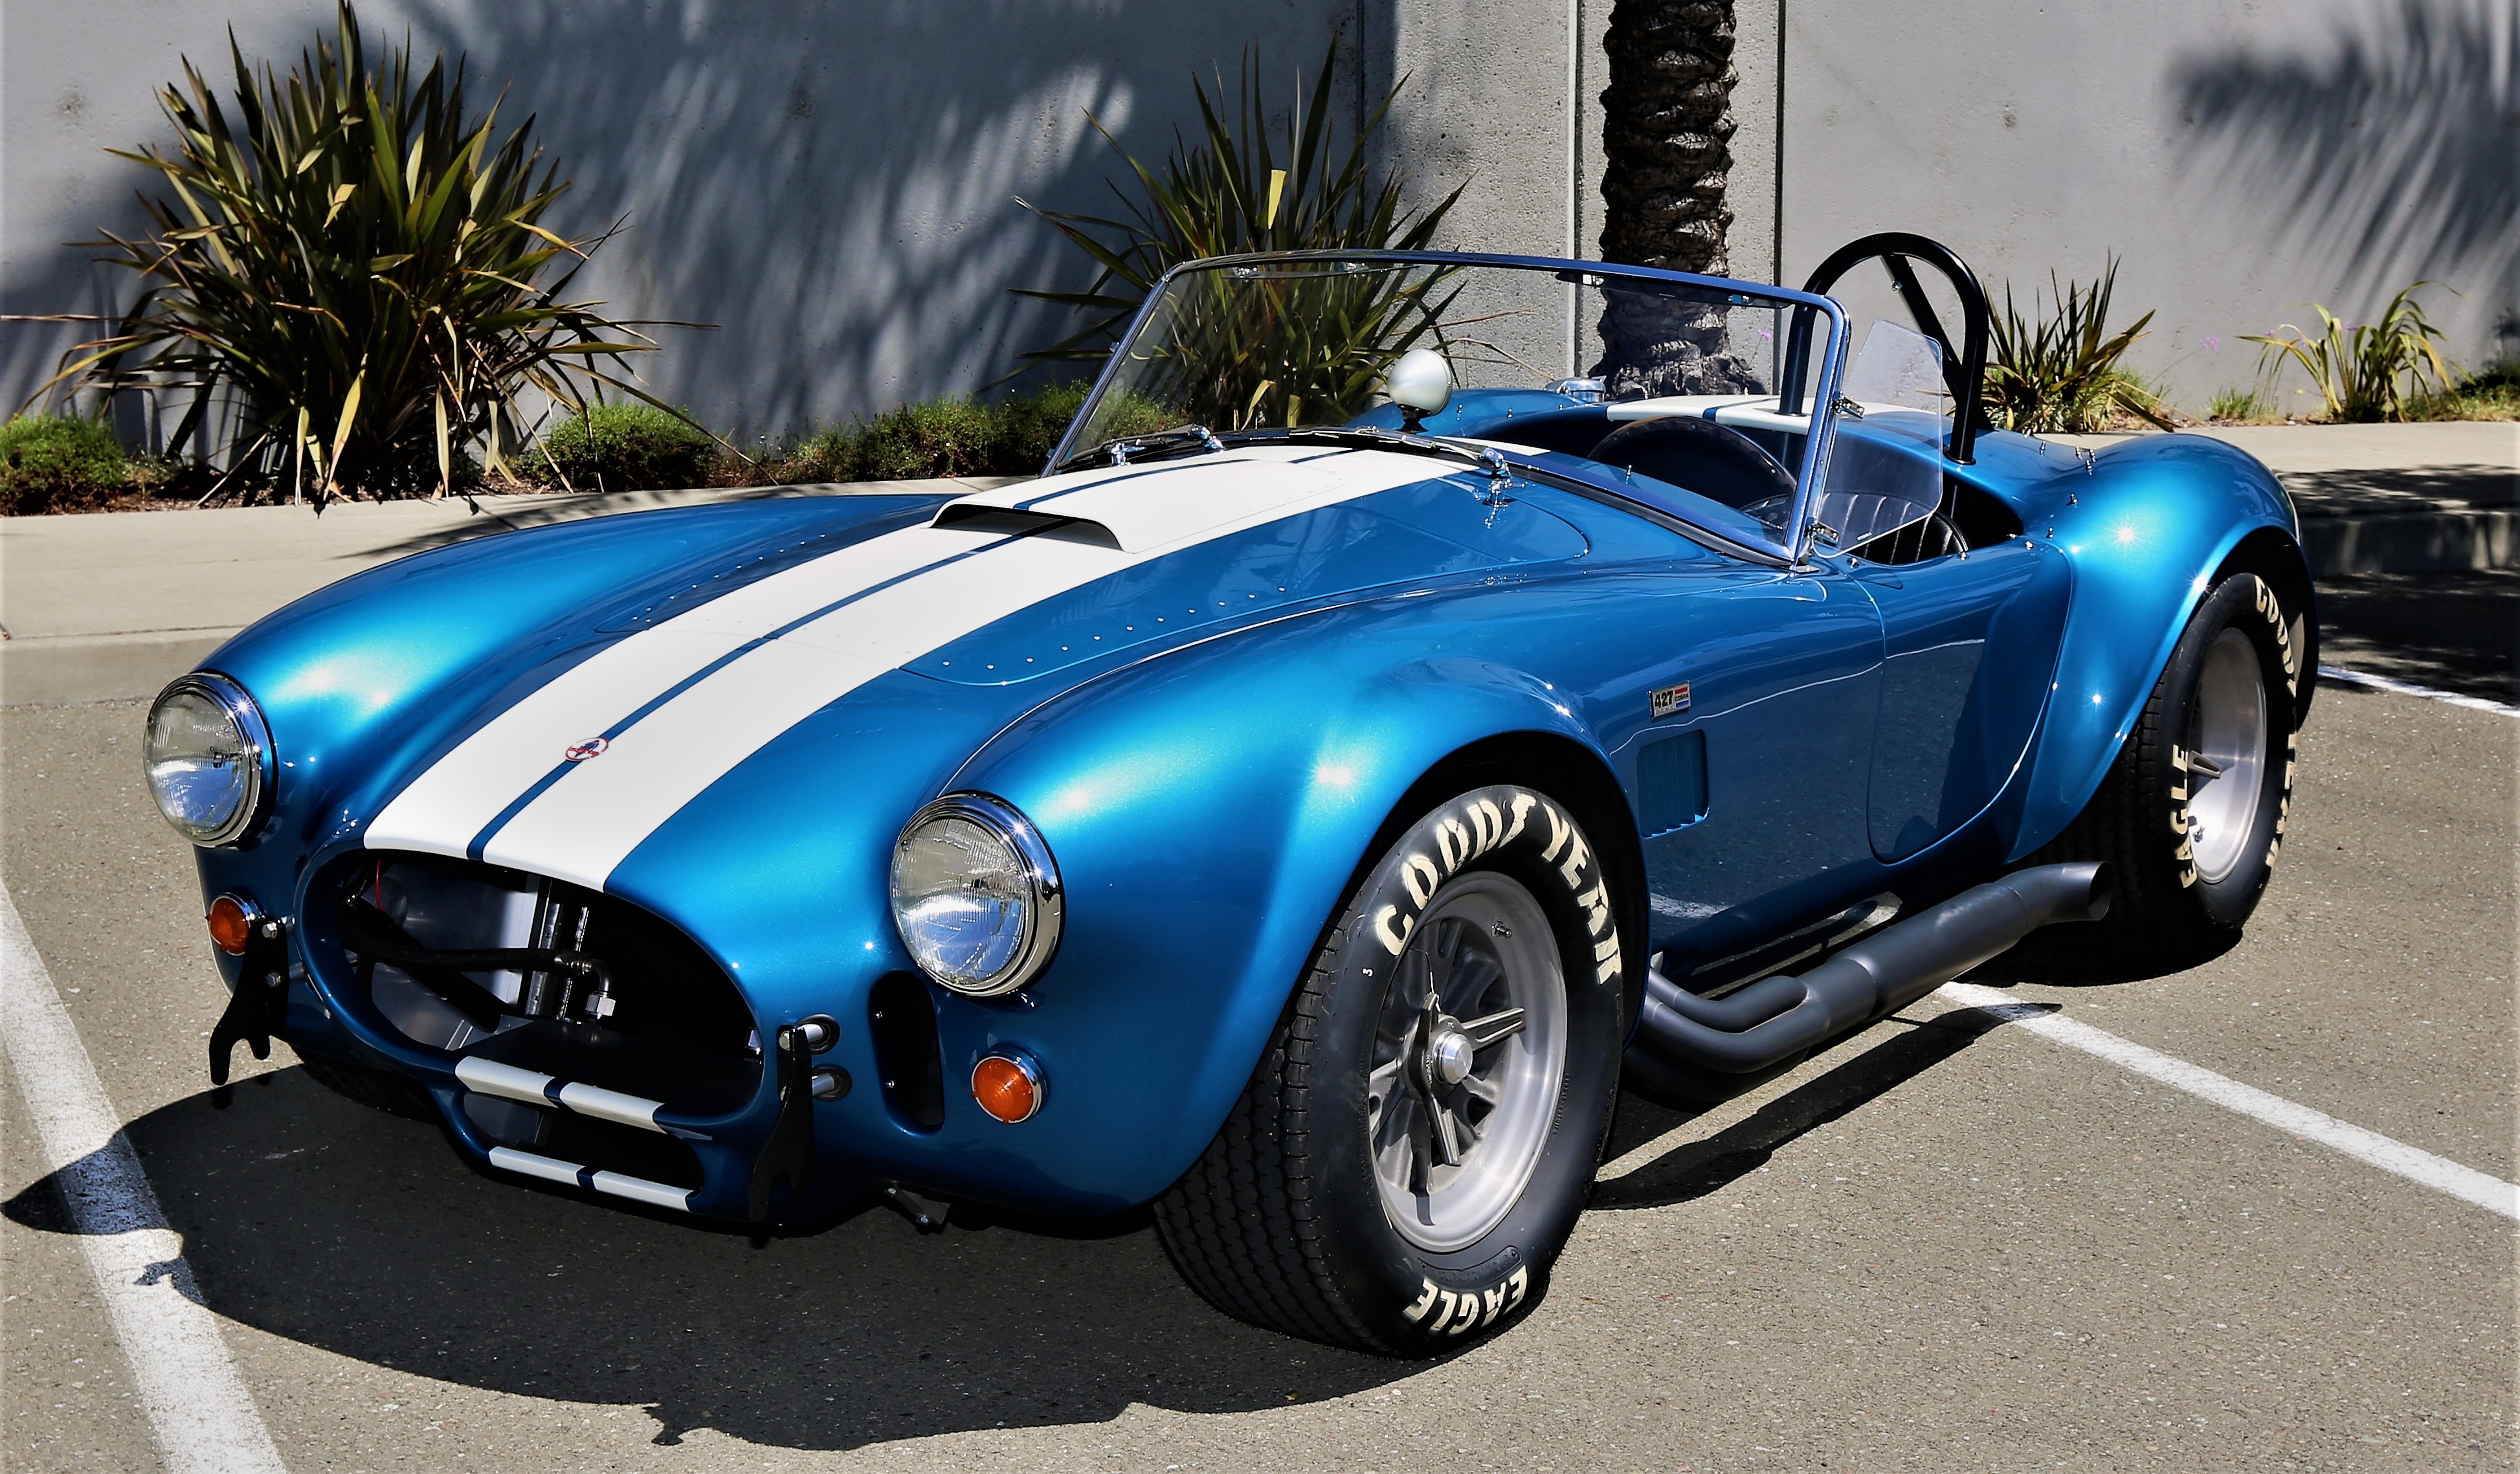 Genuine 427 Shelby Competition Cobra Racecar Production Goes Full